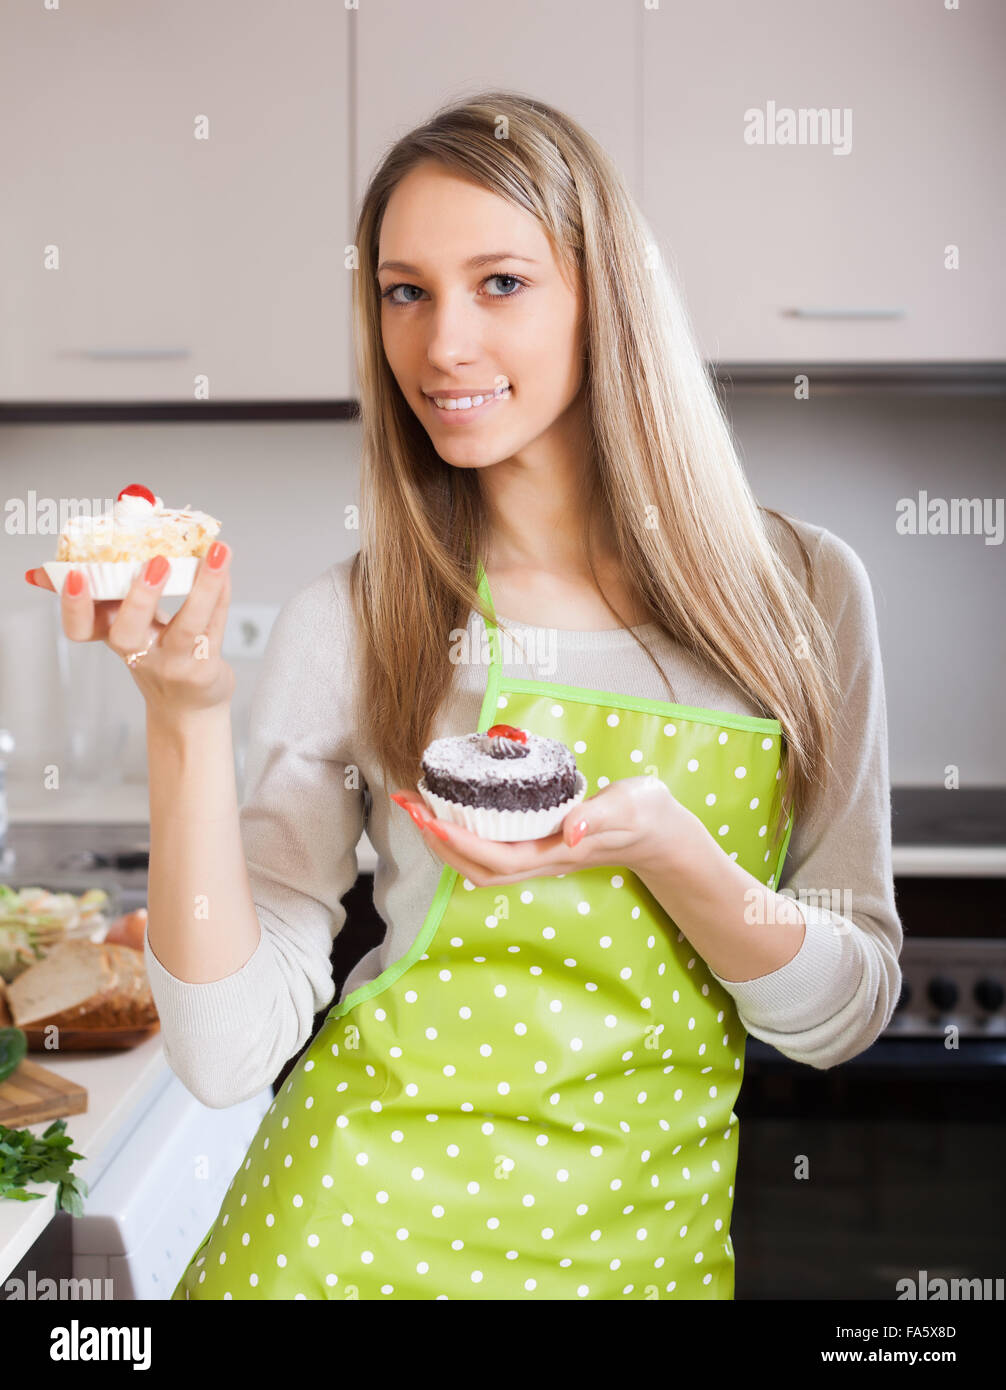 Housewife in apron with cakes in kitchen Stock Photo